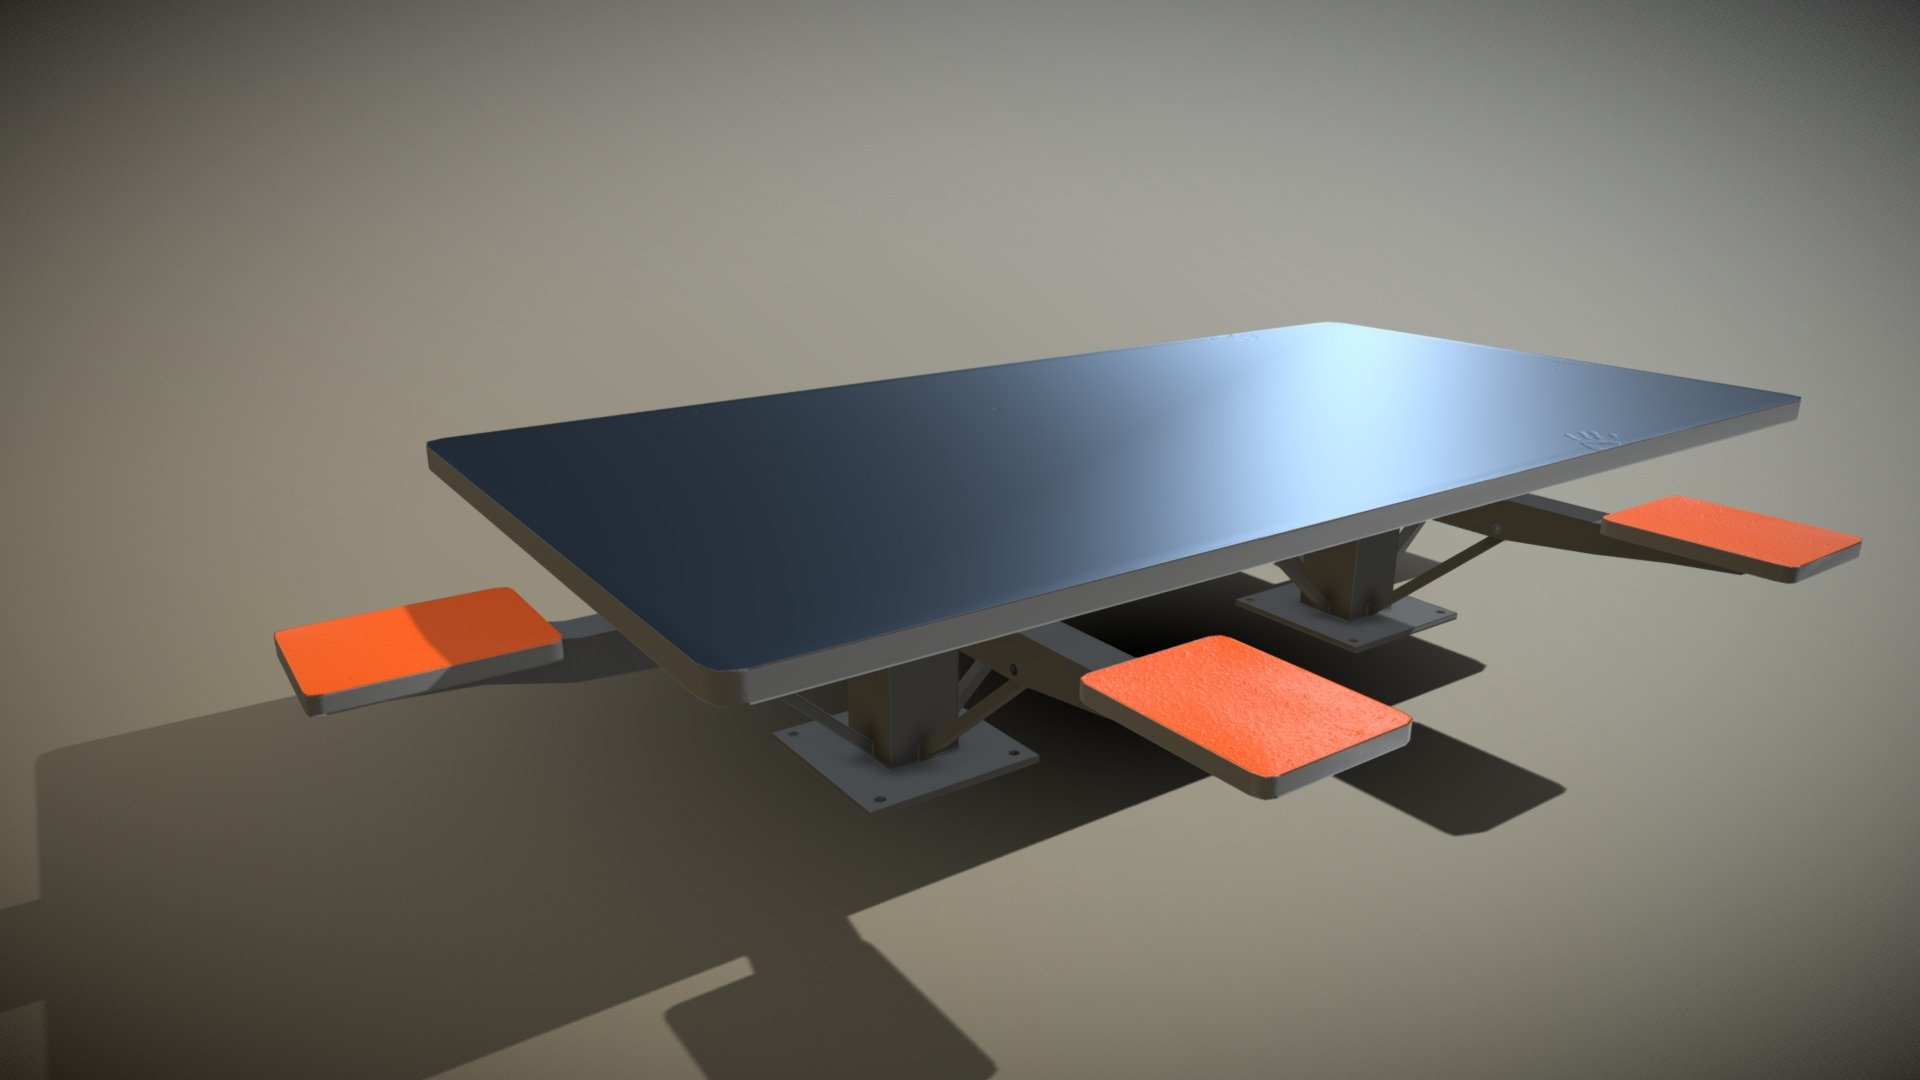 3ds max 2019+substance painter 2. 
Nothing fancy, just a dining table 3d model